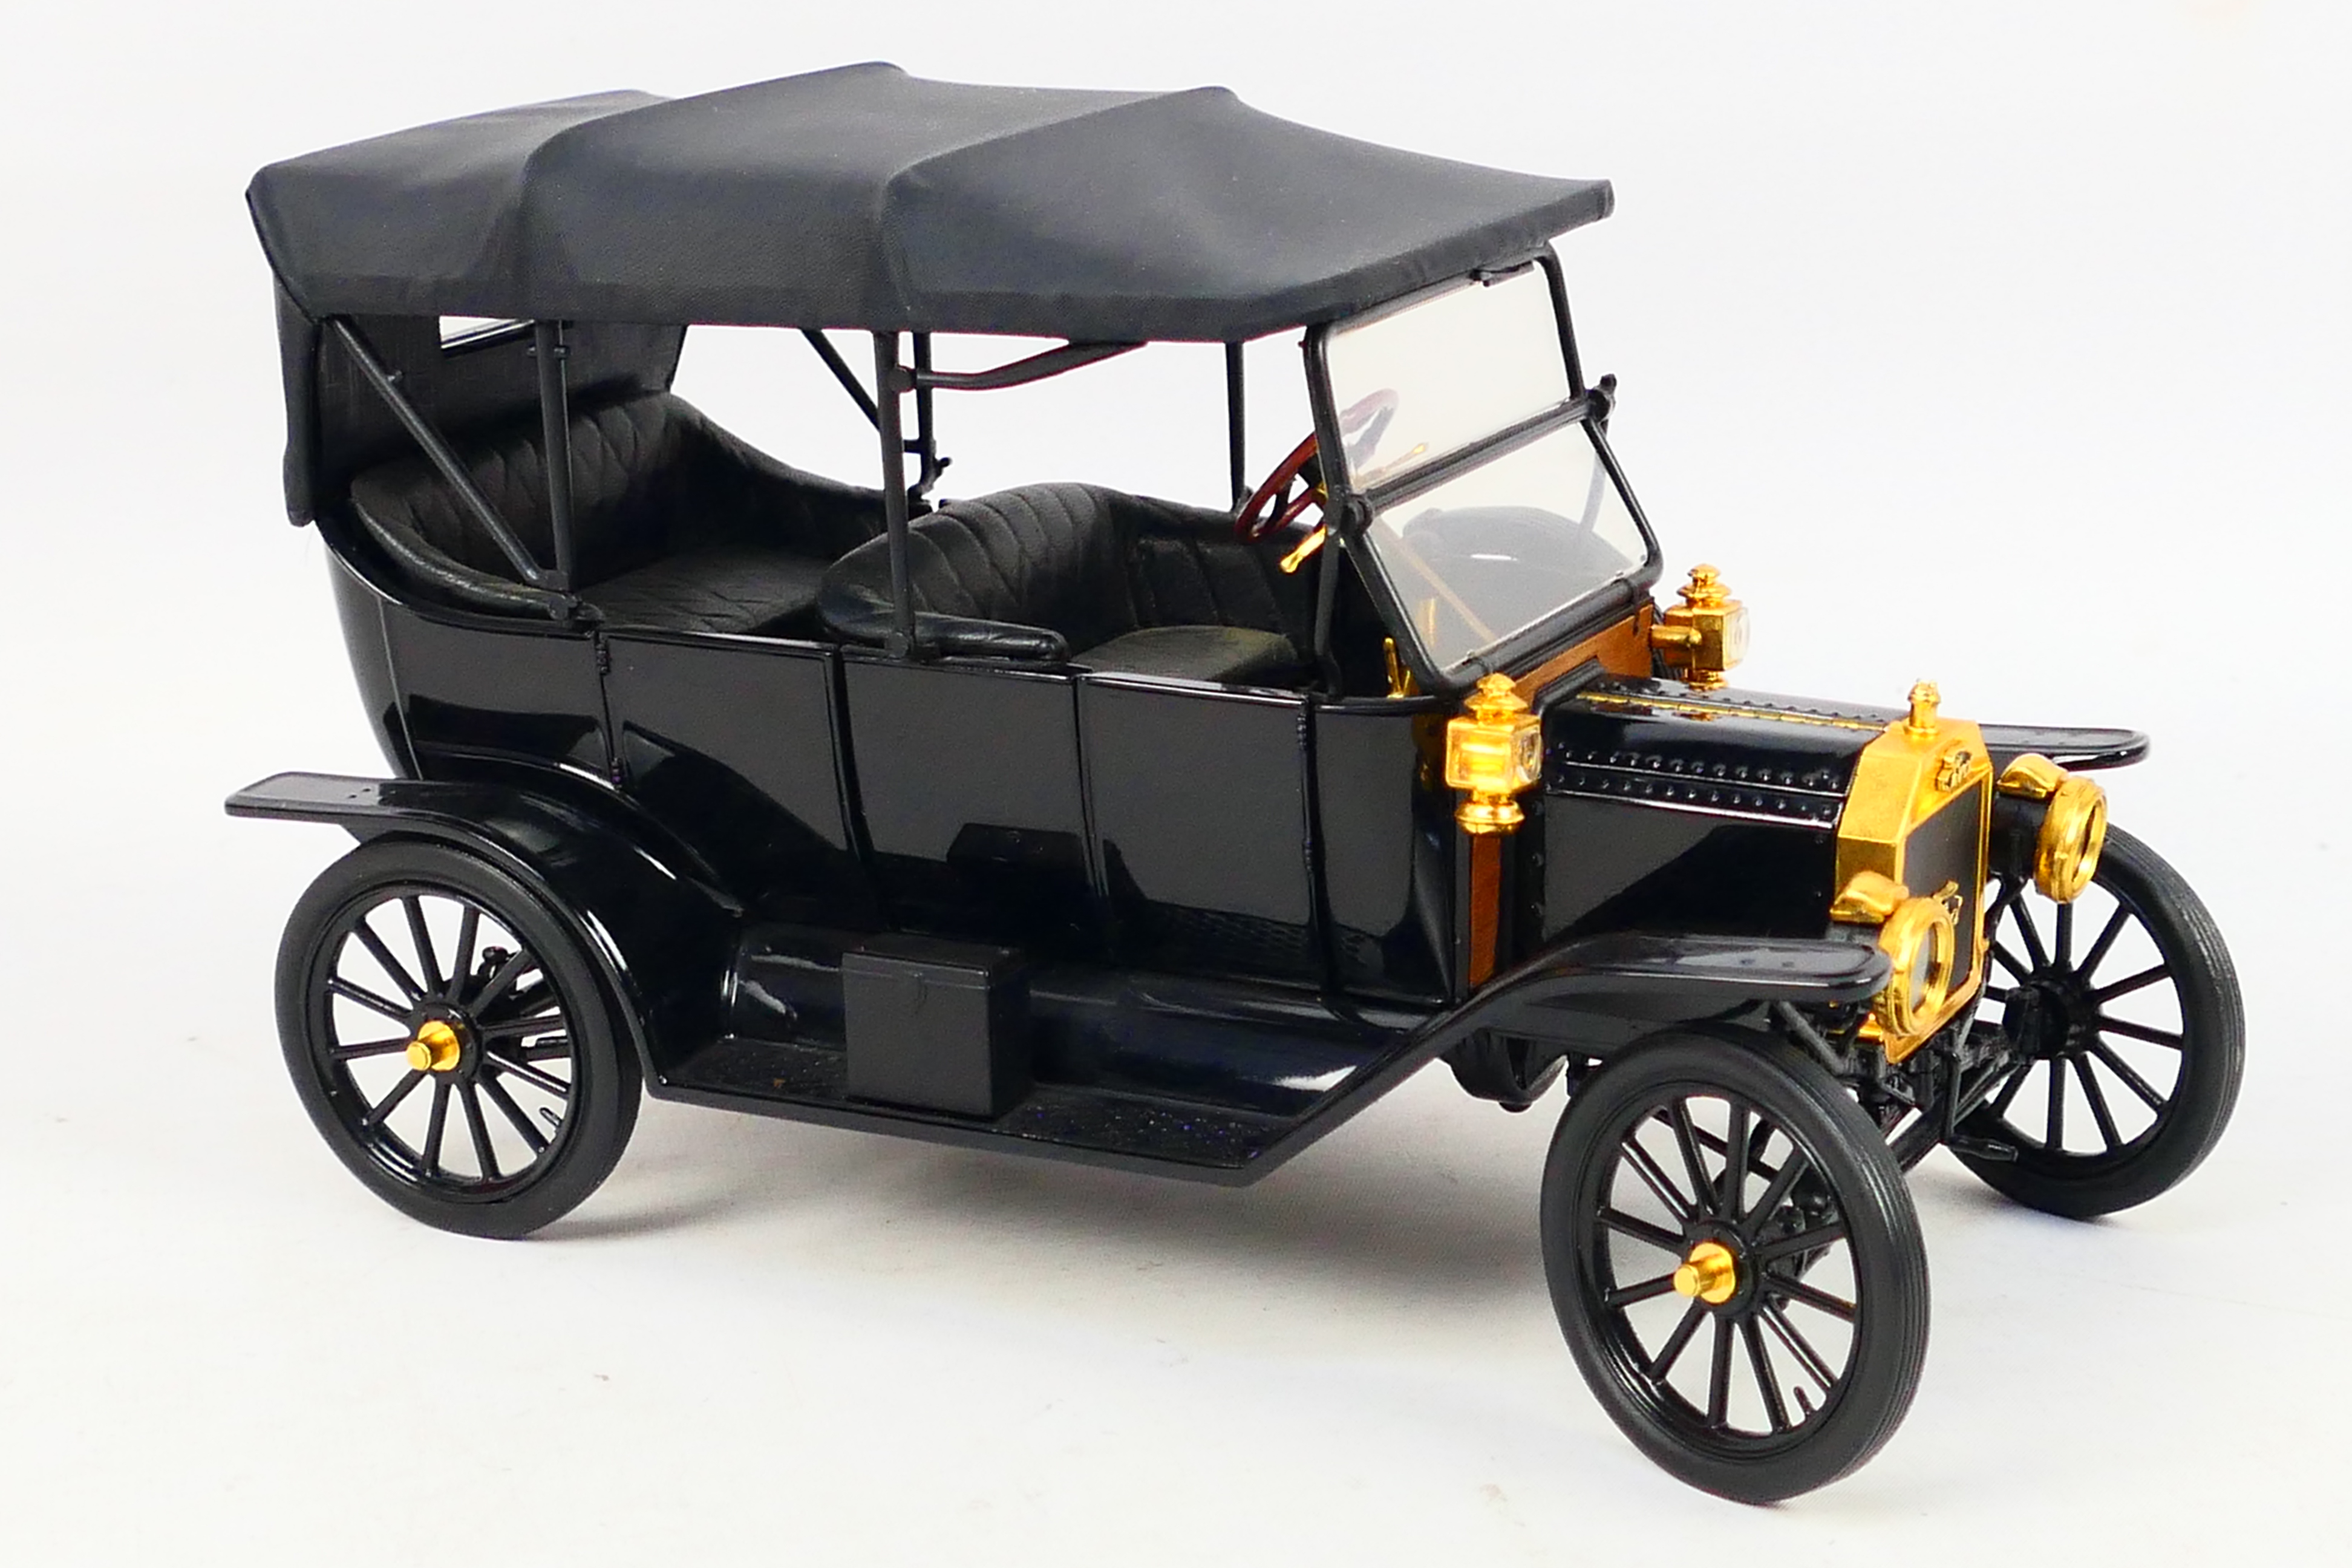 Franklin Mint - A 1:16 scale 1913 Ford Model T. - Image 7 of 9